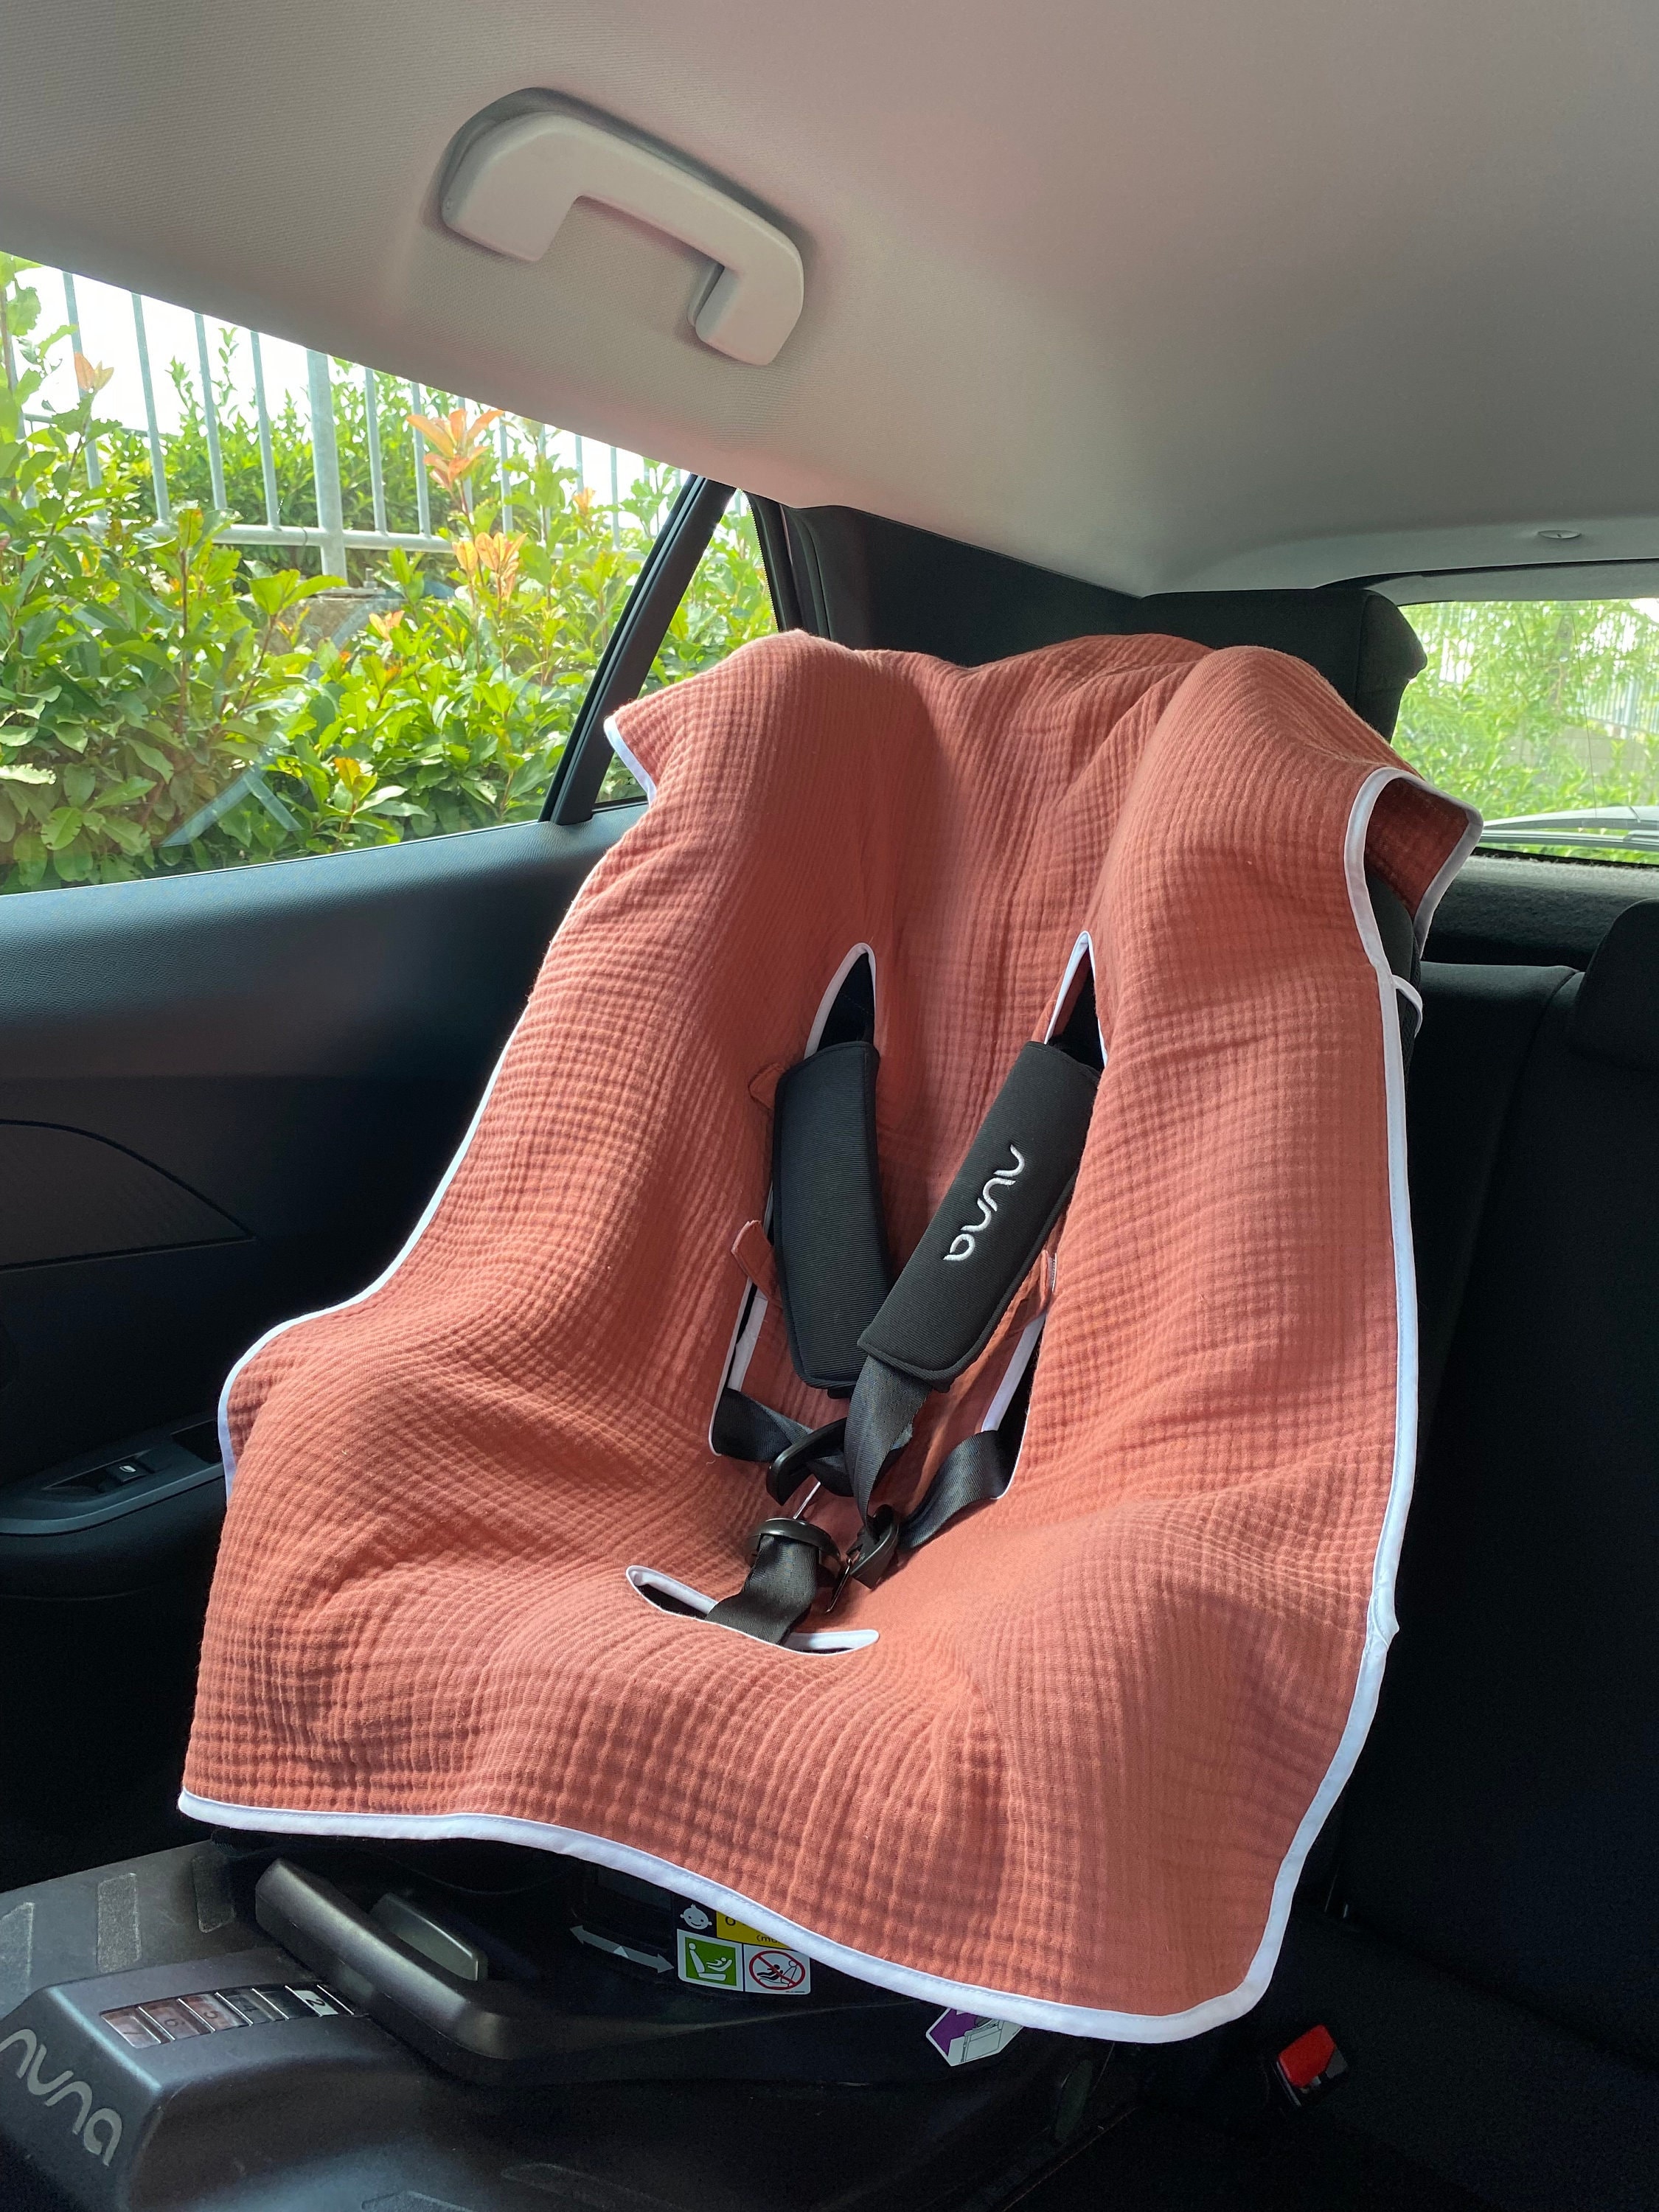 Car Seat Covers for Women Car Seat Covers Blue Car Accessories Blue Car  Seat Covers Women Car Seat Covers Car Accessories for Women 